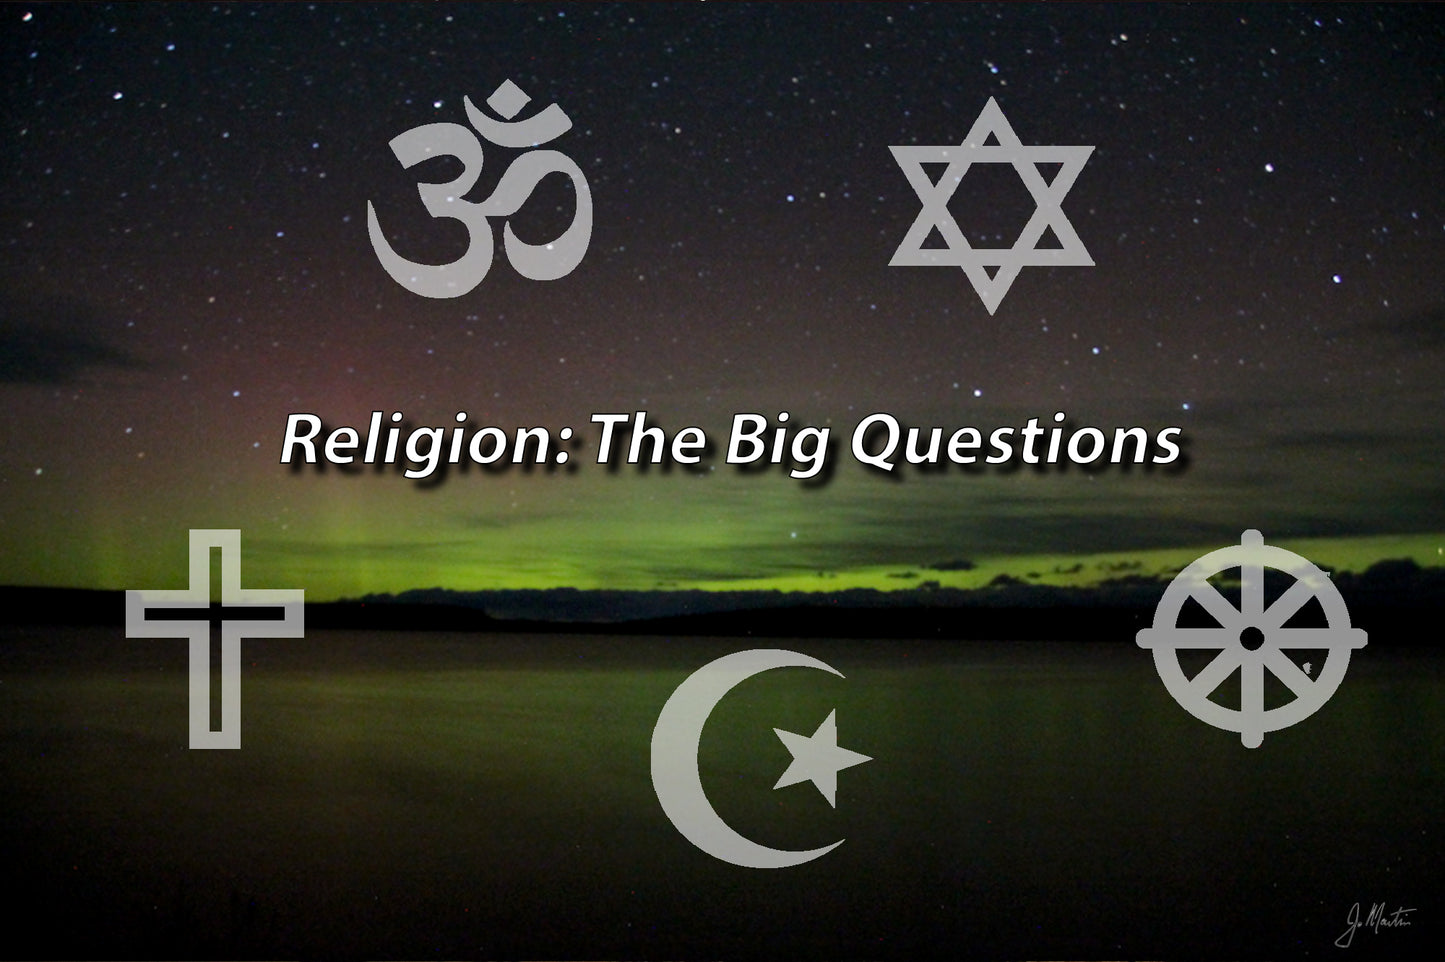 Religion: The Big Questions